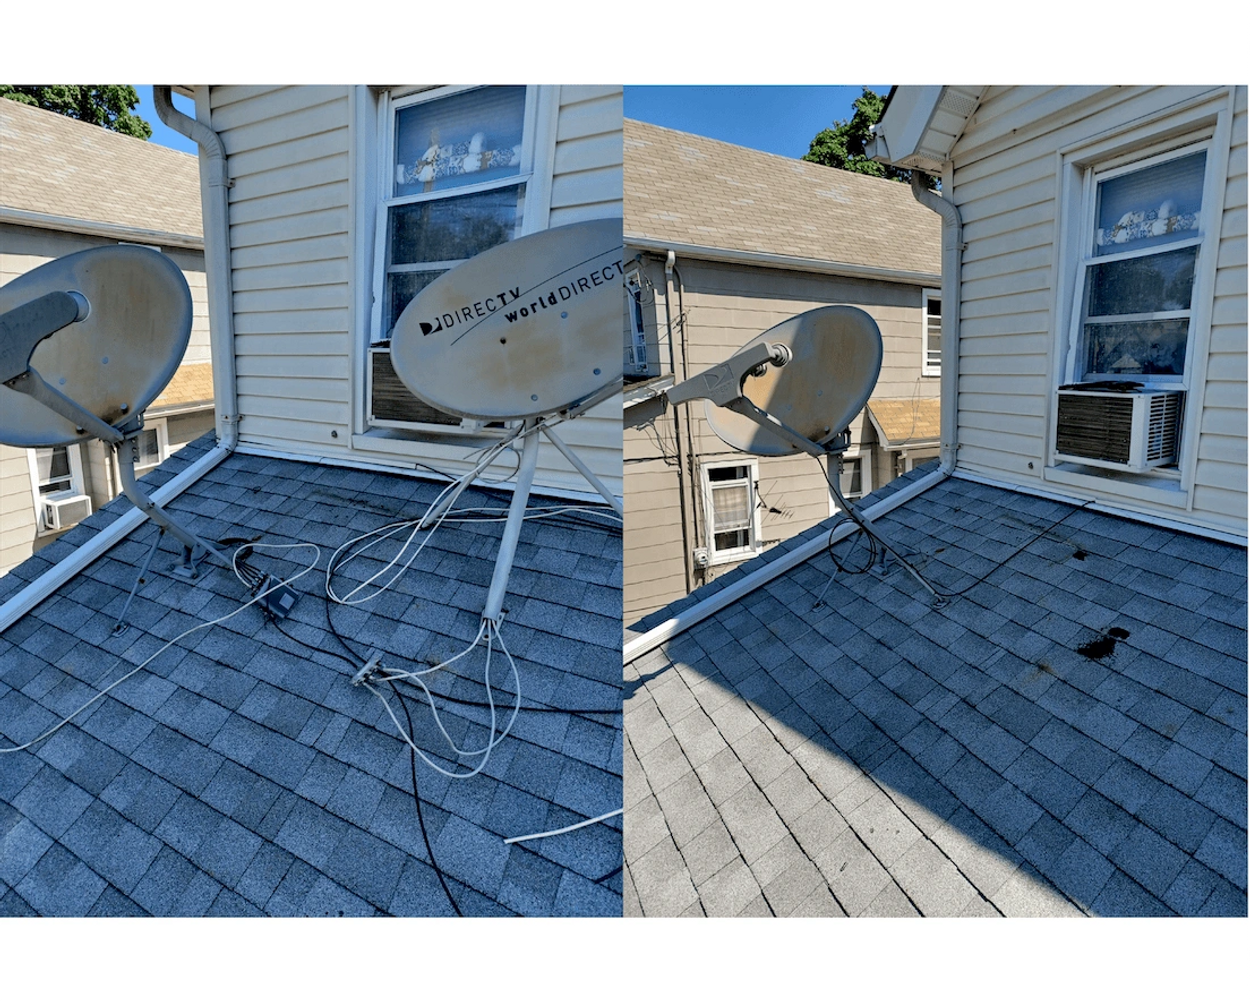 Messy Direct TV Satellite dish before Image, clean satellite dish clean after